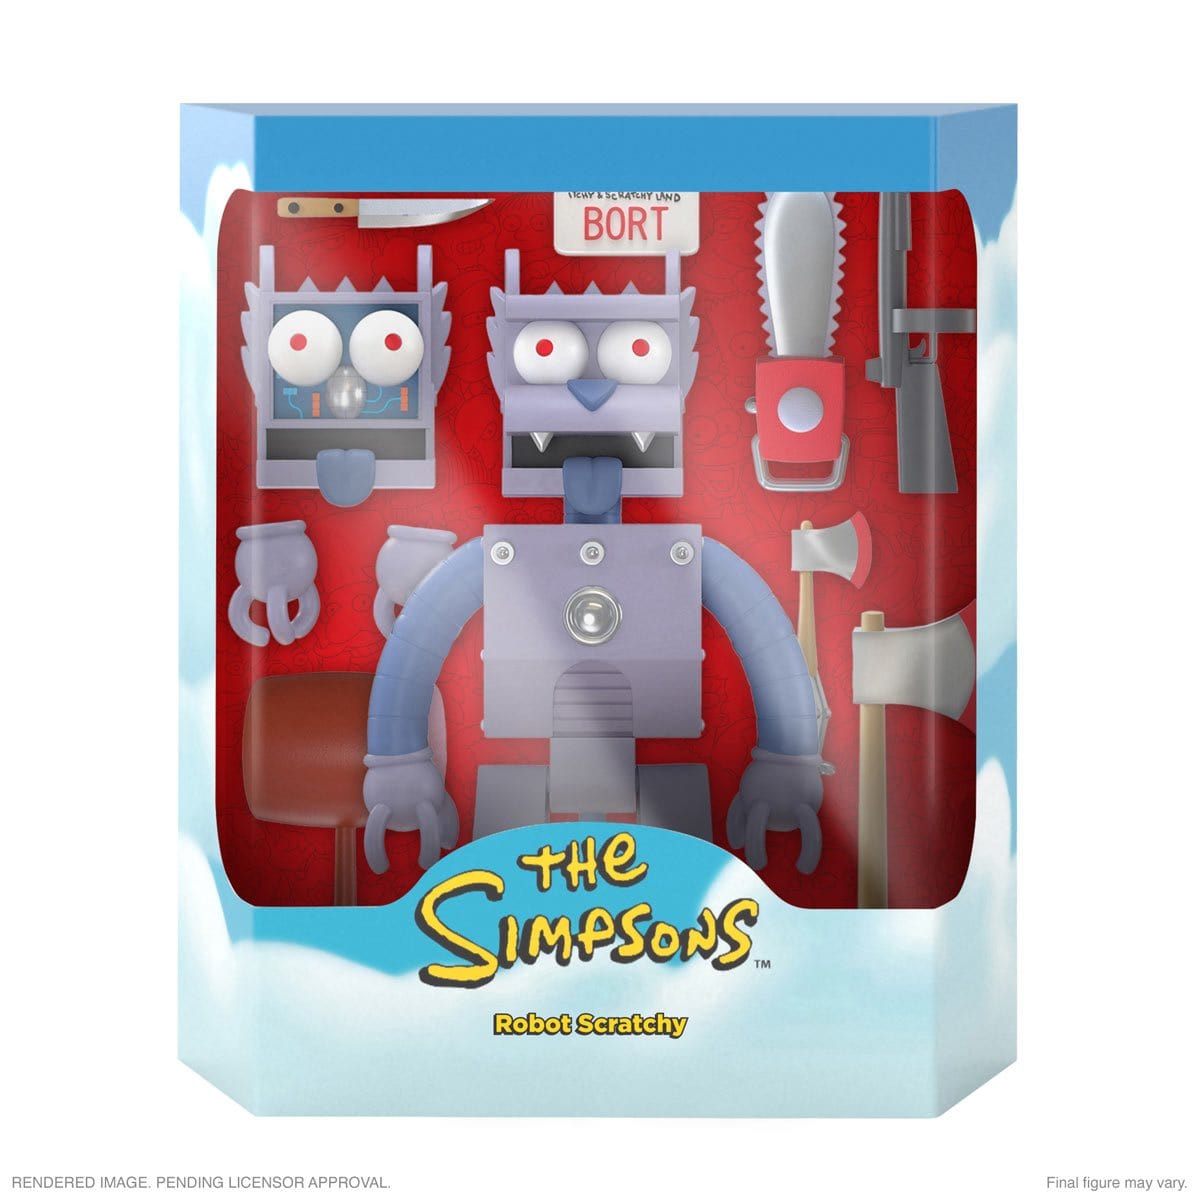 The Simpsons Robot Scratchy Super7 Ultimates 7-Inch Action Figure - Pop-O-Loco - Super7